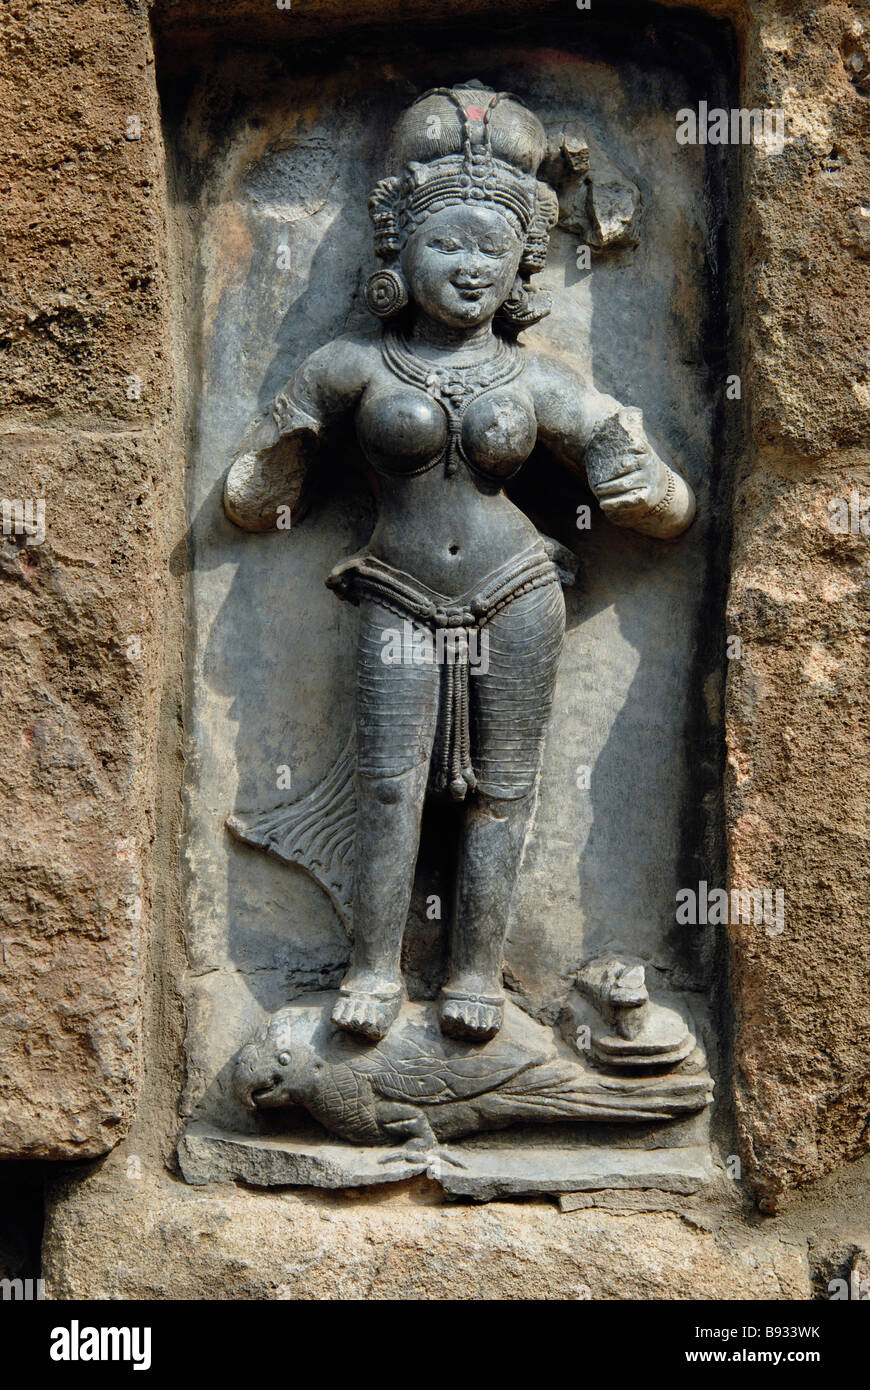 Hirapur Orissa, Yogini Temple, Yogini No.53. Aditi standing on a parrot, two armed with braid of hair over her hand. Stock Photo